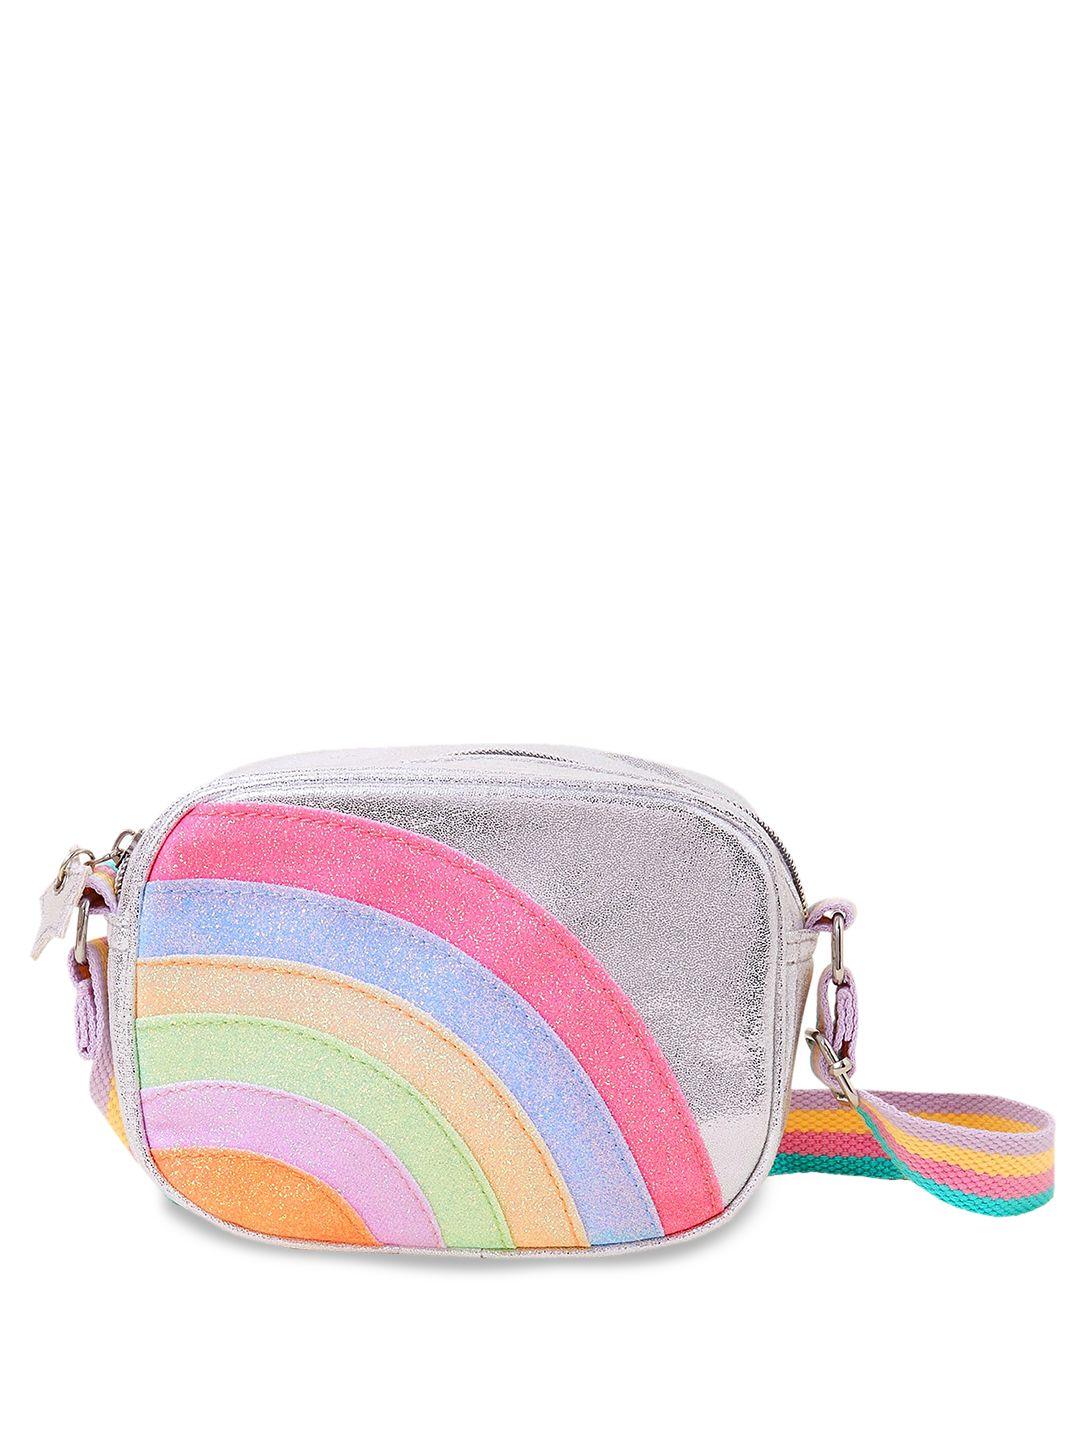 Accessorize Girls Colourblocked Structured Sling Bag